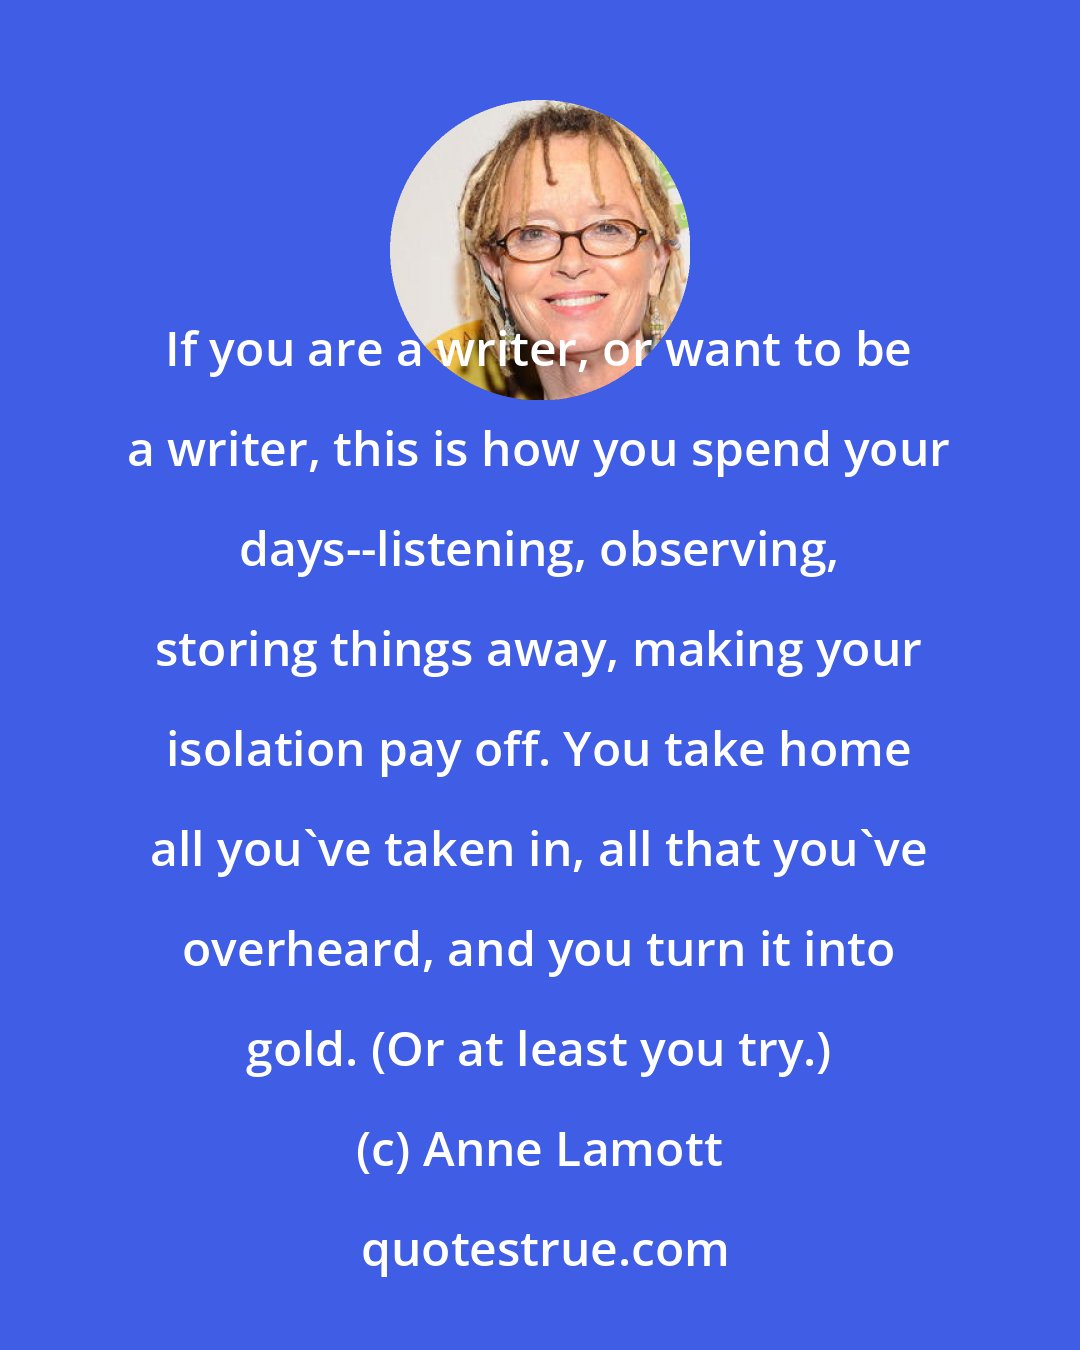 Anne Lamott: If you are a writer, or want to be a writer, this is how you spend your days--listening, observing, storing things away, making your isolation pay off. You take home all you've taken in, all that you've overheard, and you turn it into gold. (Or at least you try.)